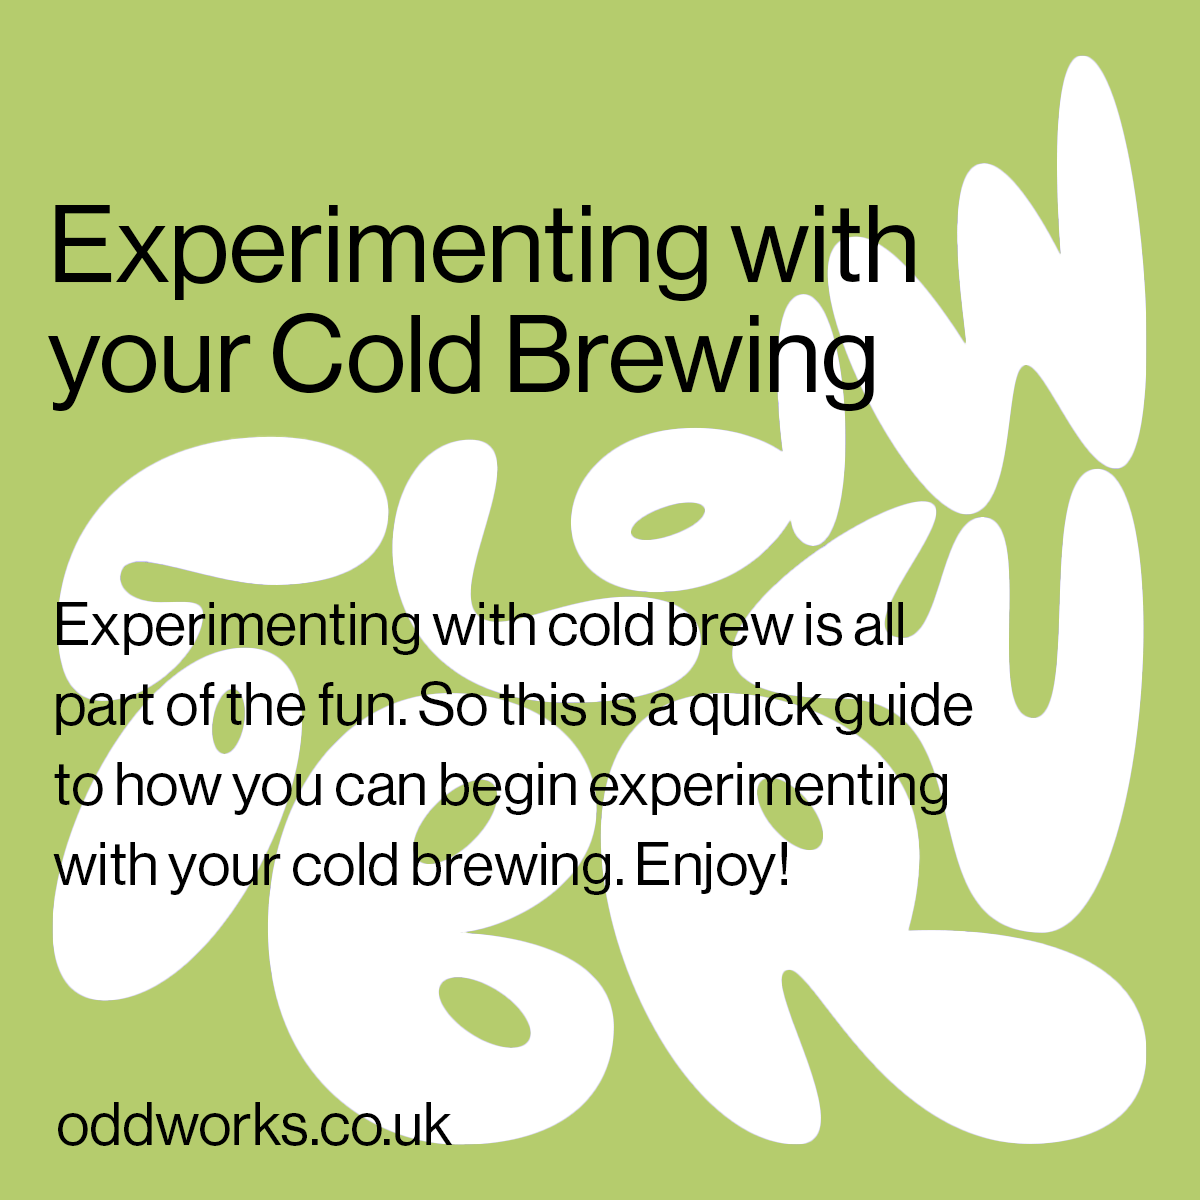 Blog #2 Experimenting with your Cold Brewing